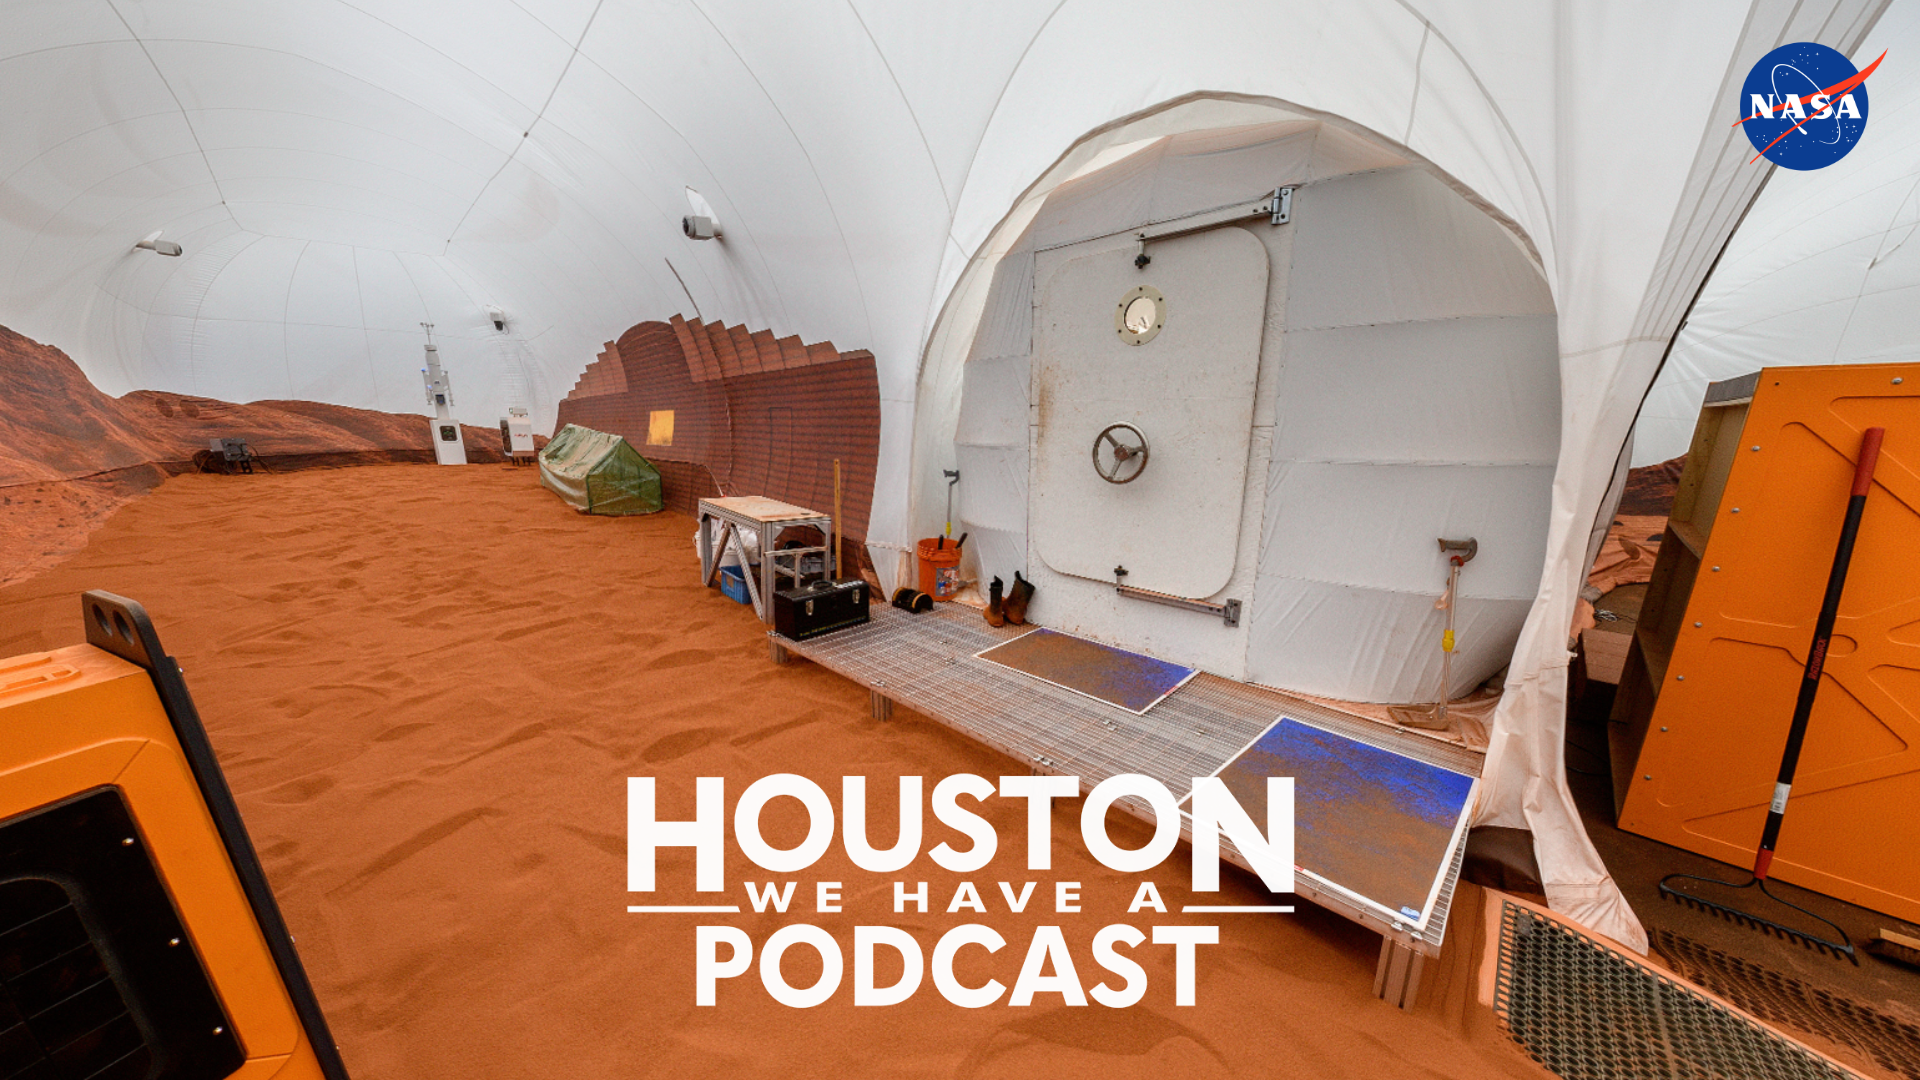 Houston We Have a Podcast Ep. 346: Mars Audio Log #12. Image shows the HWHAP logo in white text at the bottom of the image. The text overlays a photo of the 1,200 square-foot sand box located at the CHAPEA habitat. The sandbox is Mars-realistic, with rust-colored dust and regolith.